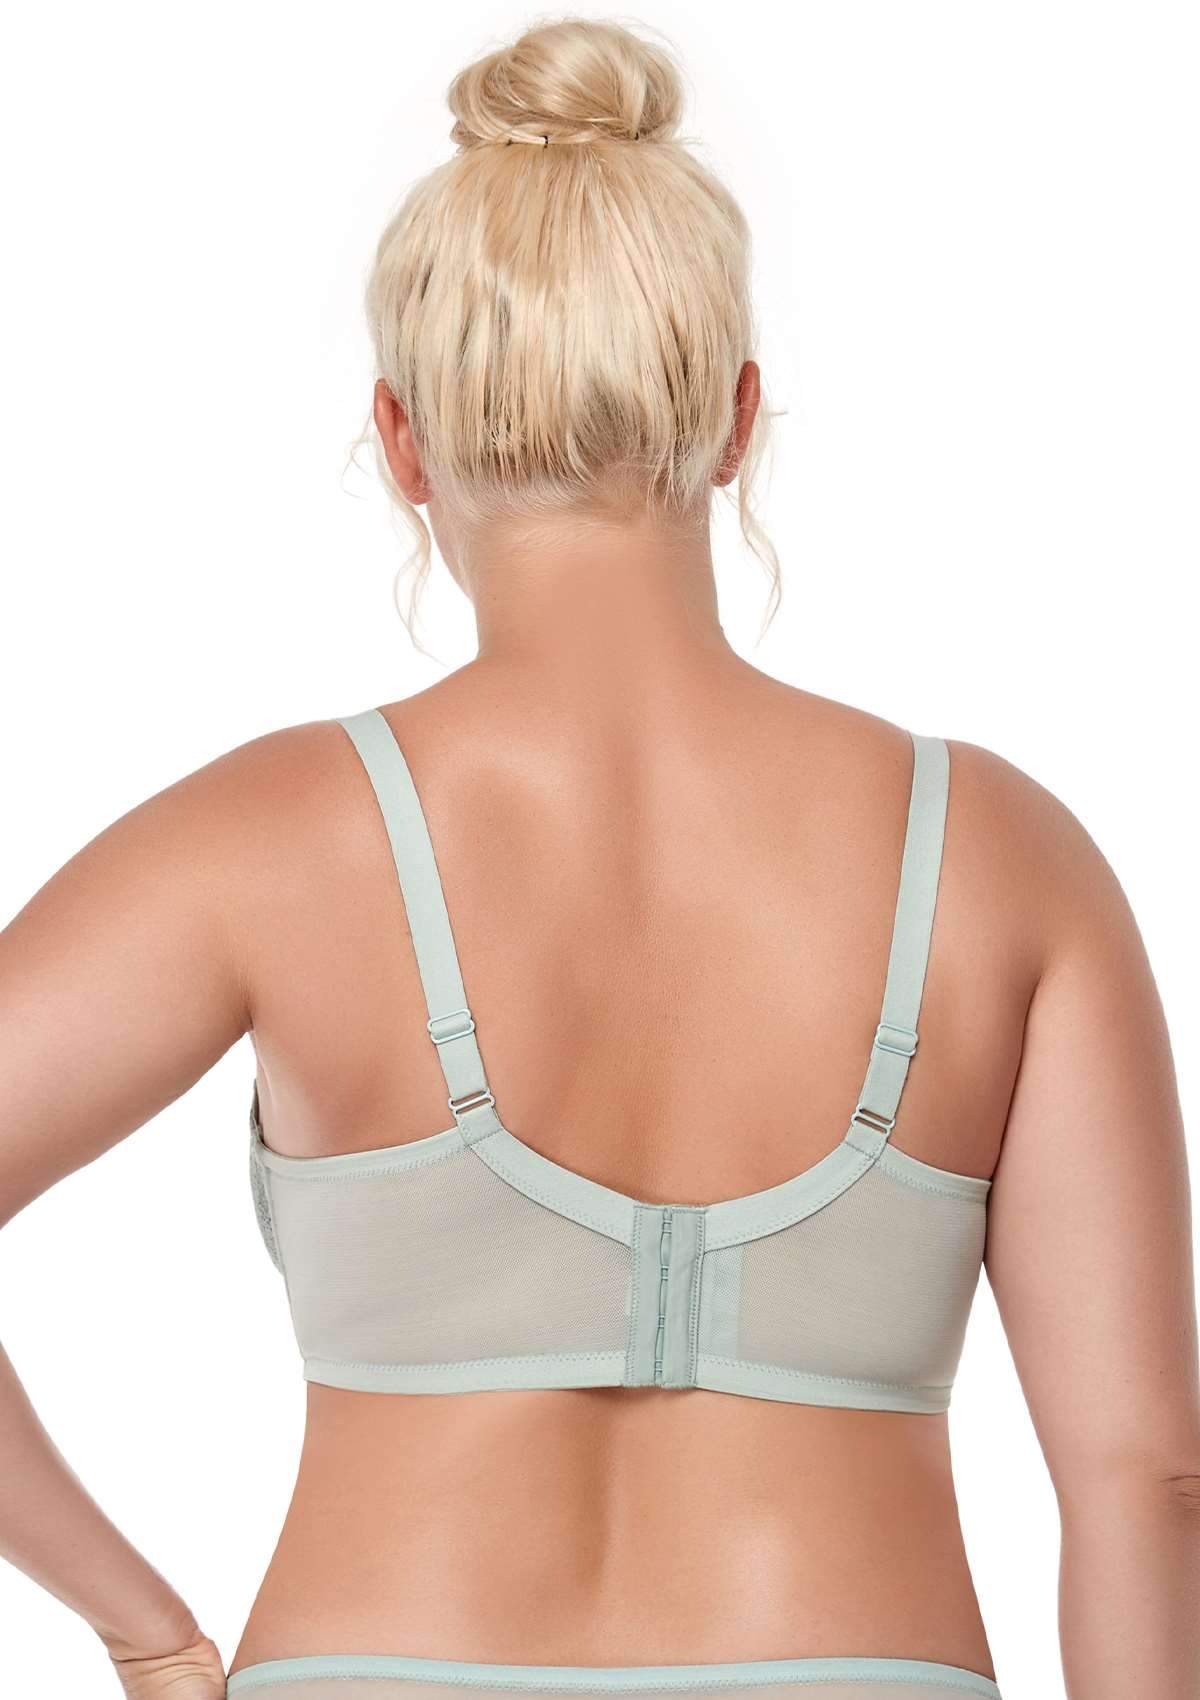 HSIA All-Over Floral Lace: Best Bra For Elderly With Sagging Breasts - Pewter Blue / 40 / DDD/F